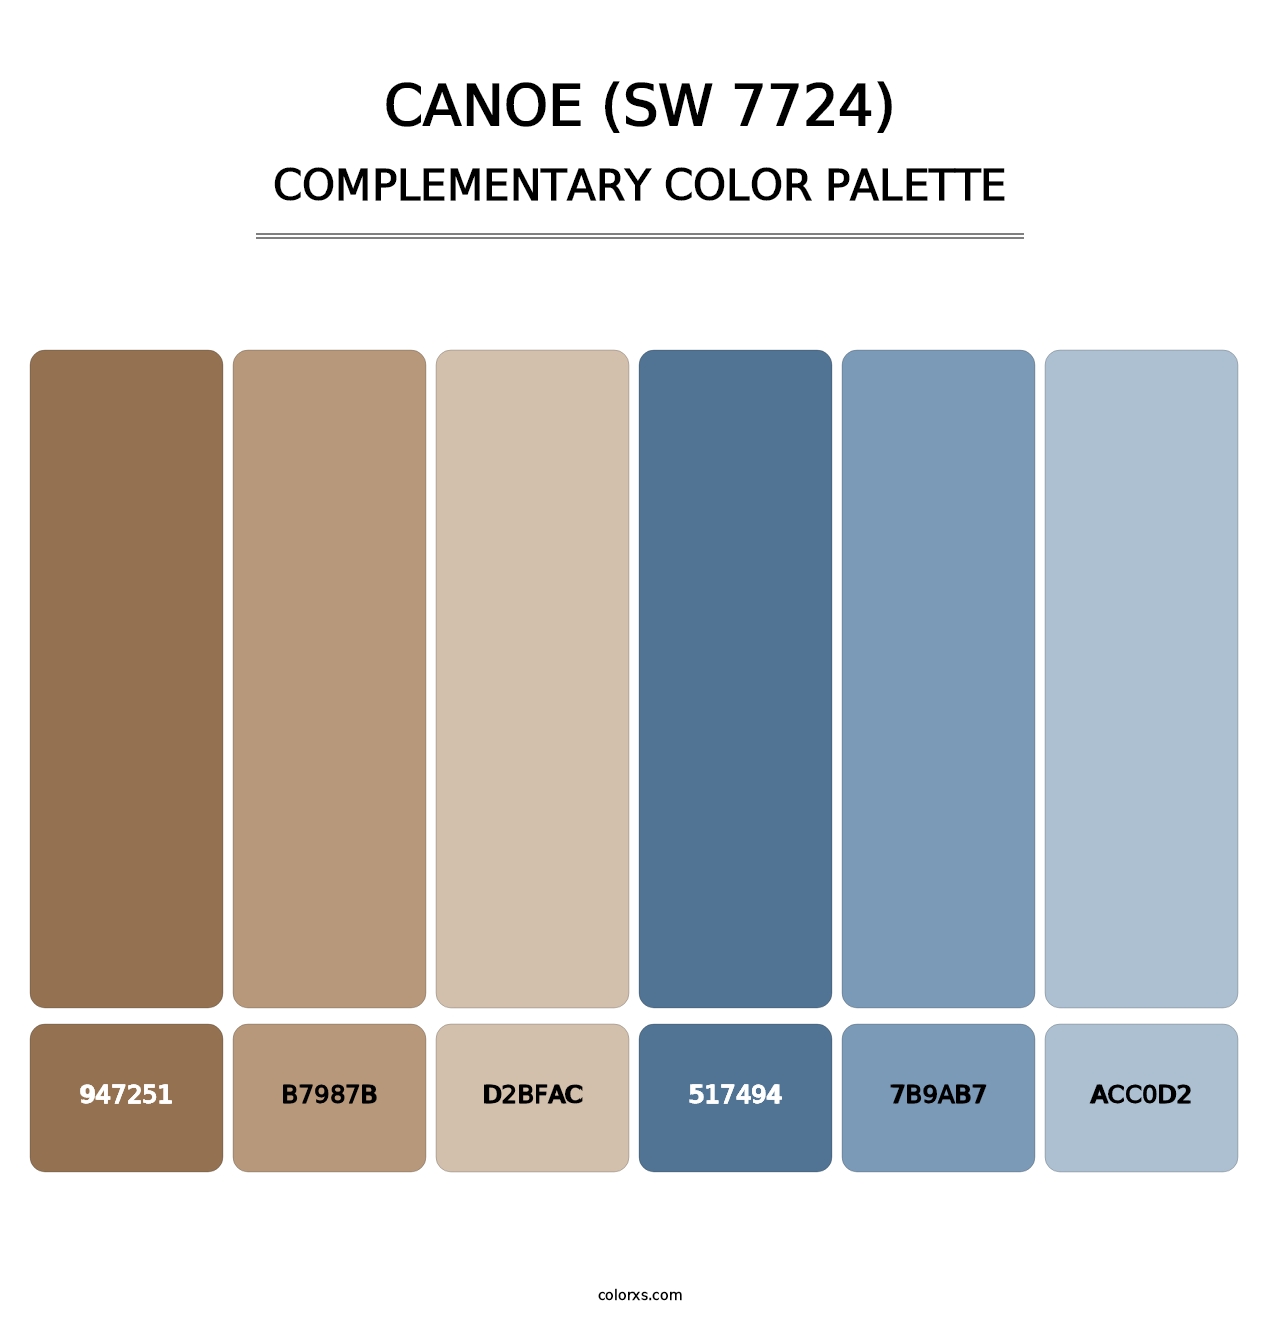 Canoe (SW 7724) - Complementary Color Palette